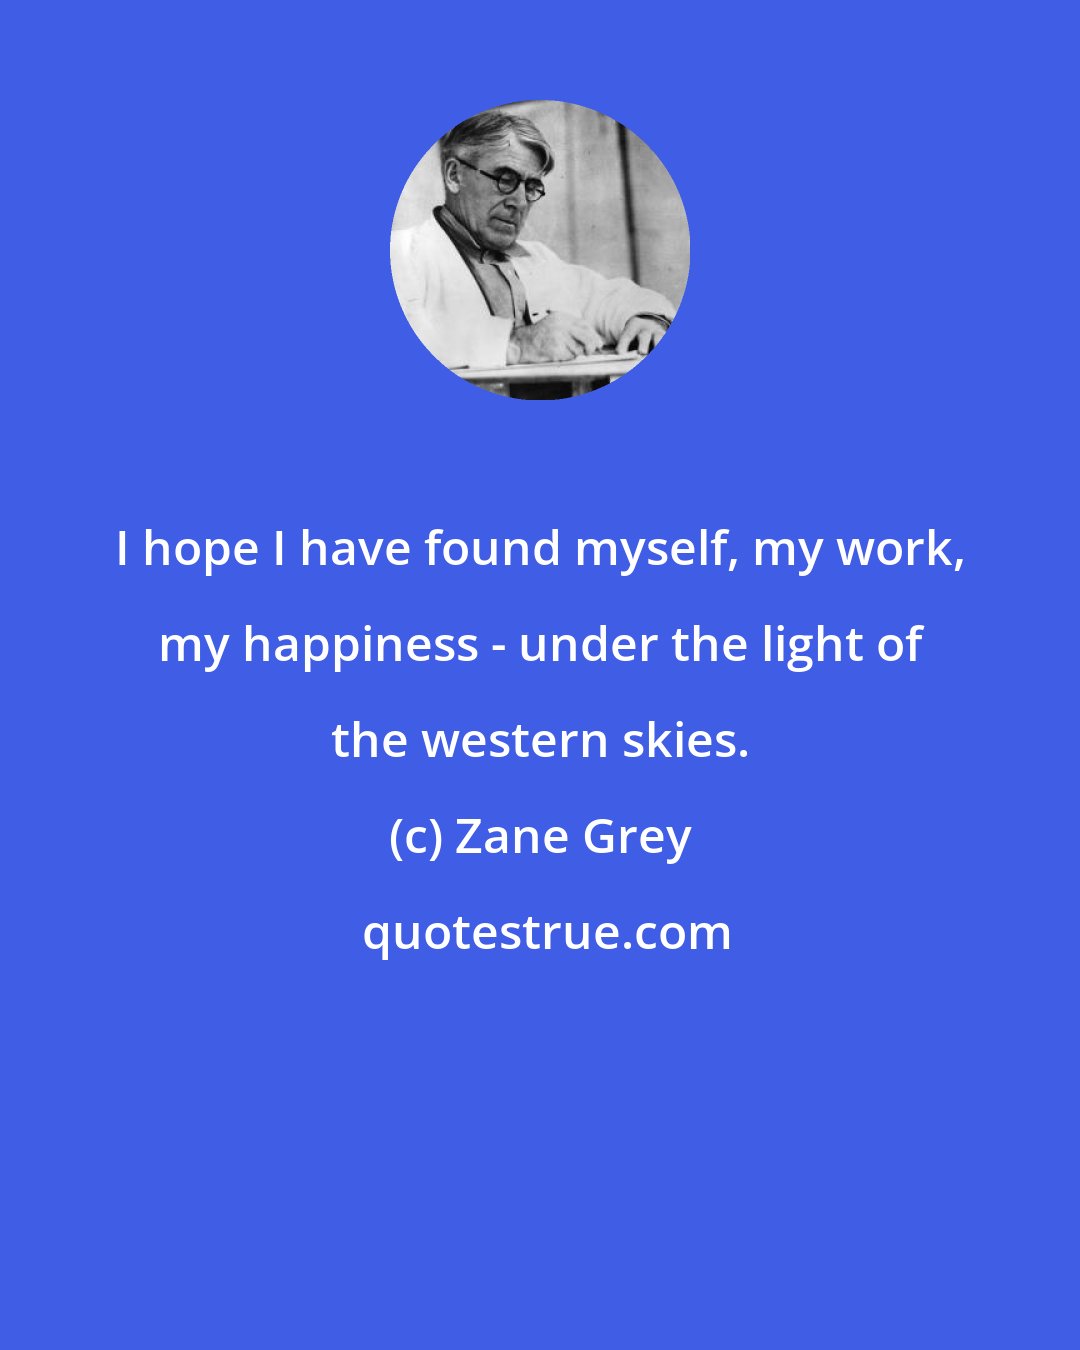 Zane Grey: I hope I have found myself, my work, my happiness - under the light of the western skies.